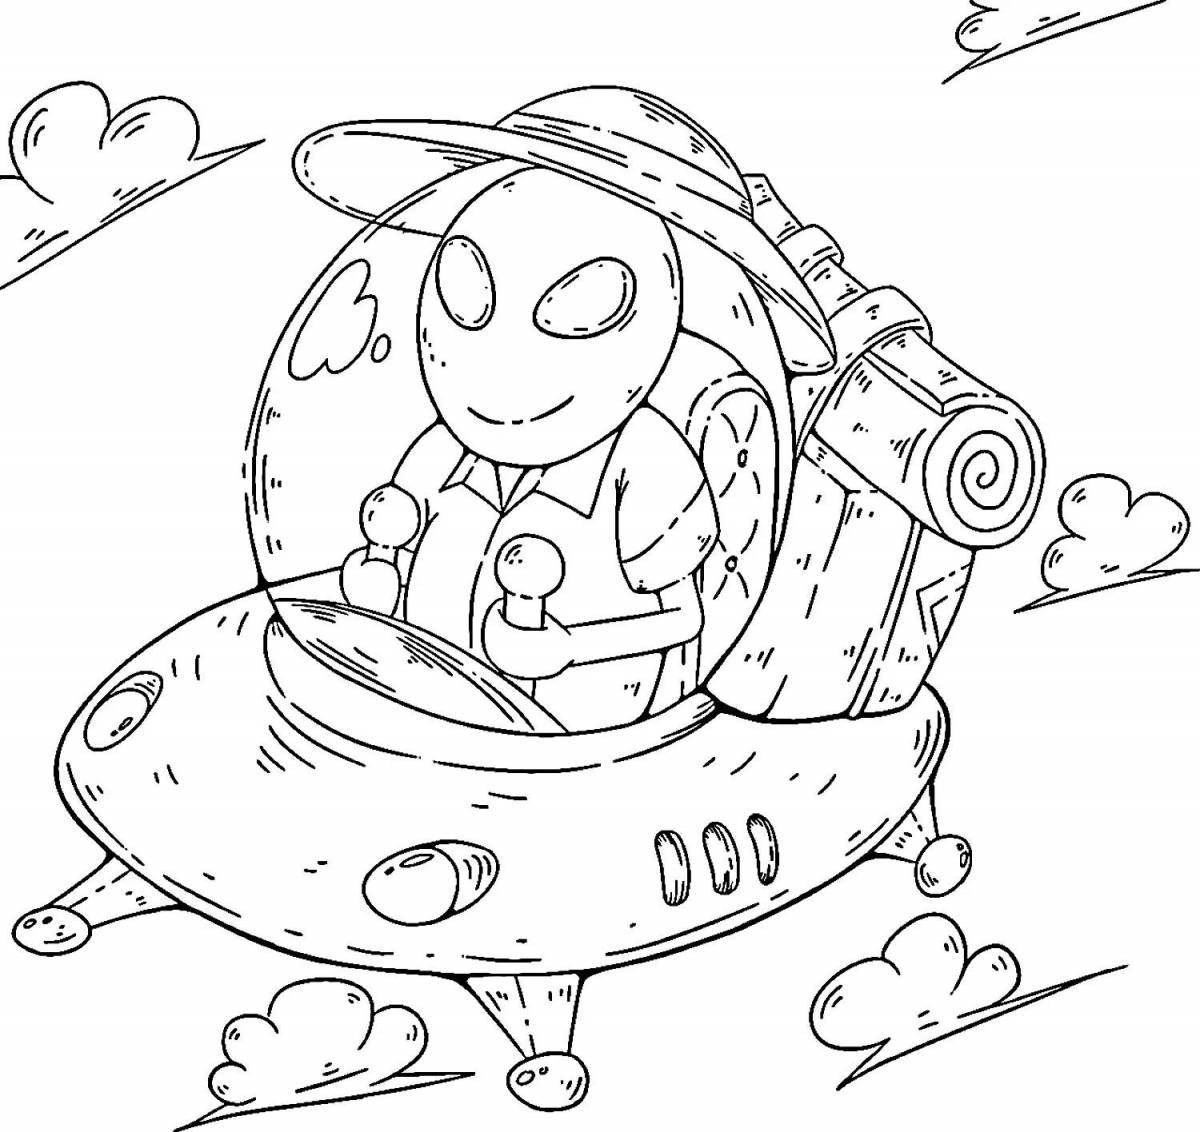 Amazing alien coloring pages for kids